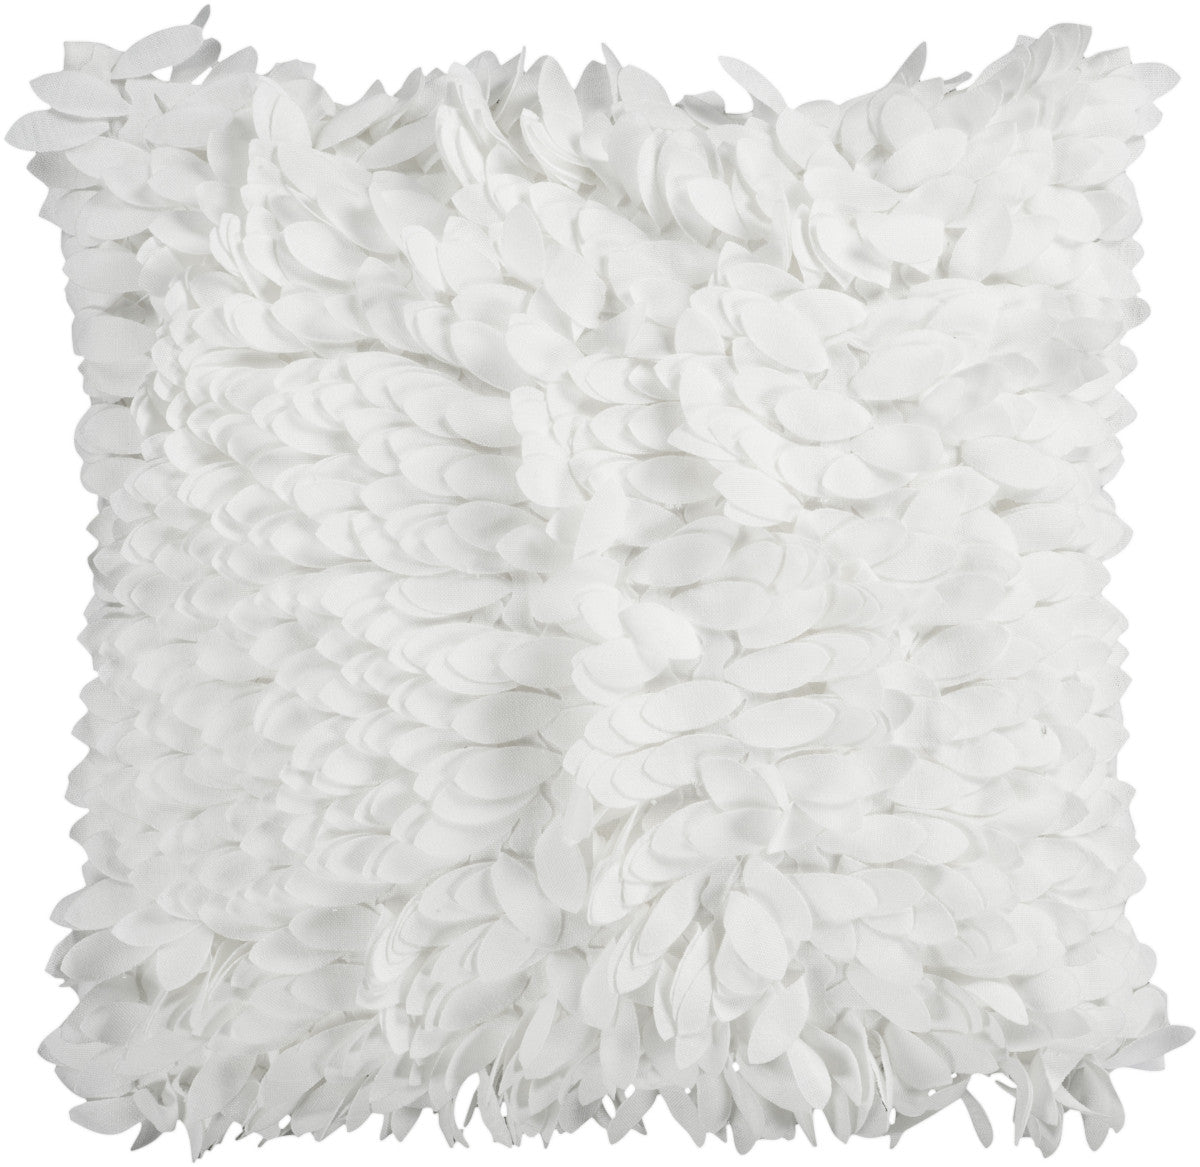 Surya Claire Ruffle and Frill HH-069 Pillow